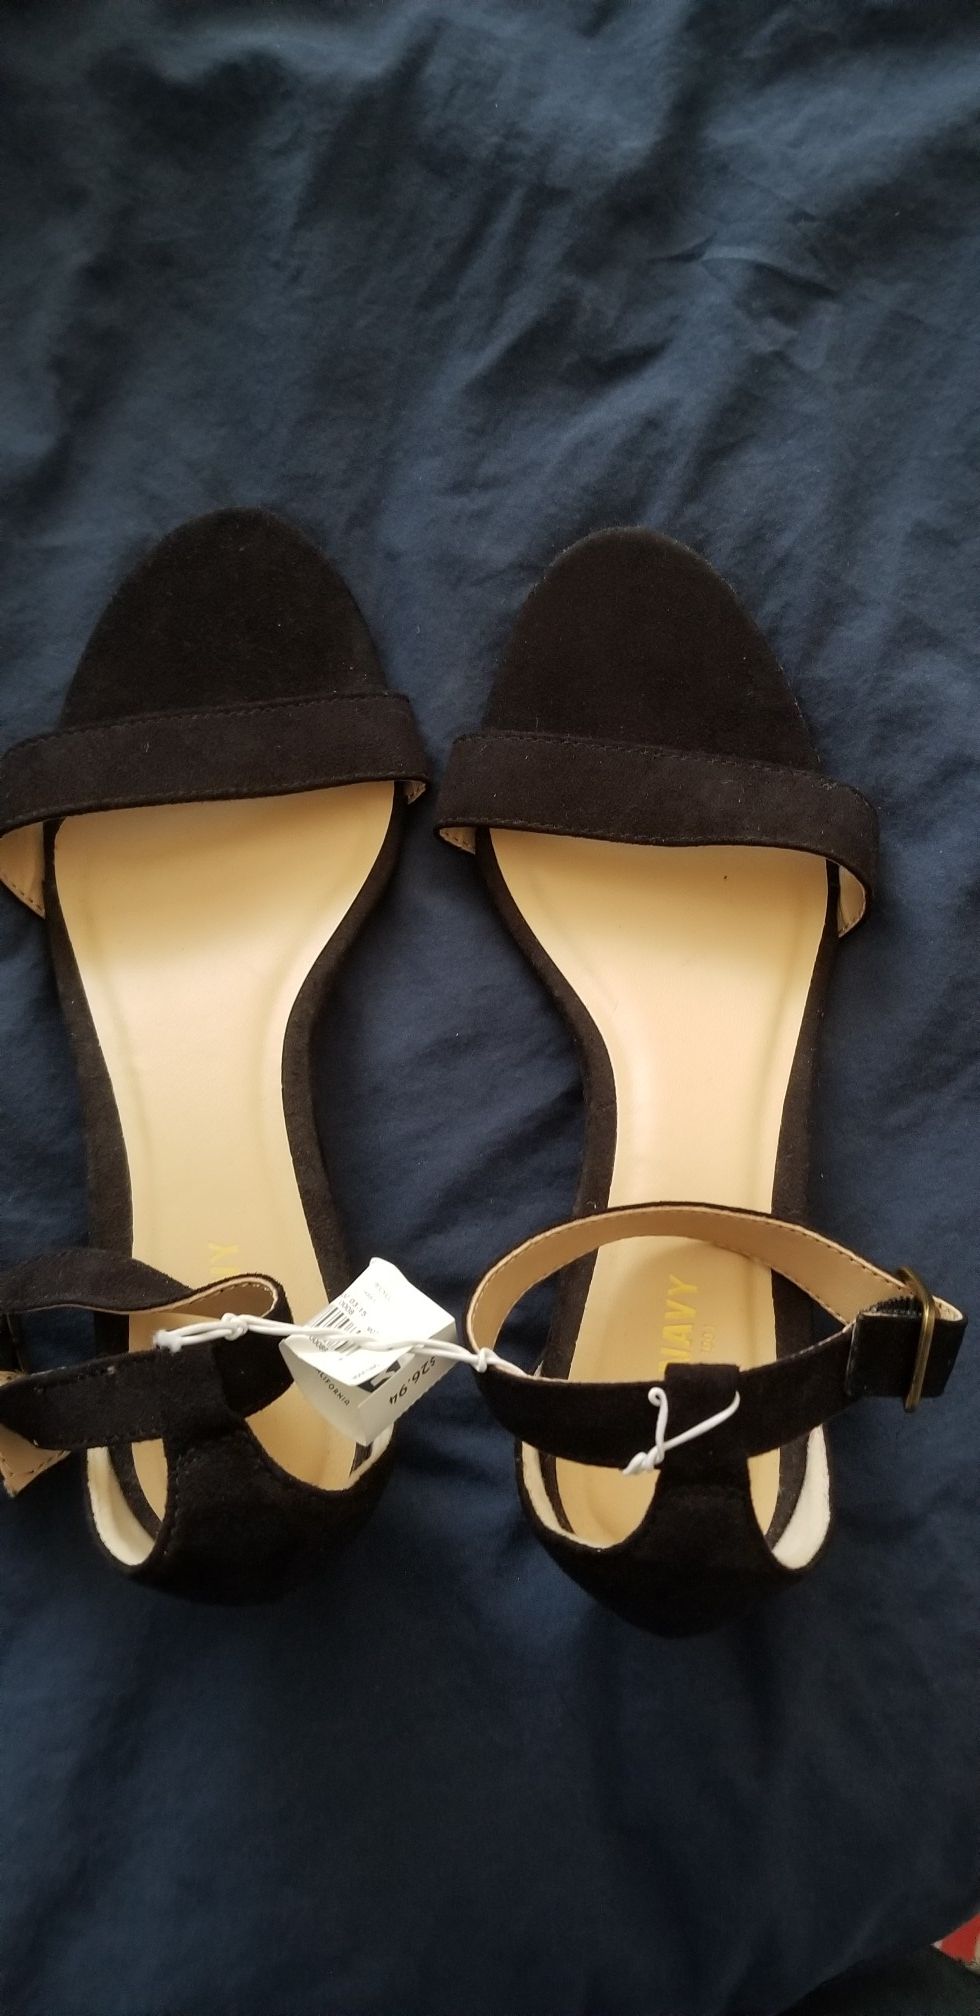 Brand new with tags size 8 Old Navy womens dress sandals